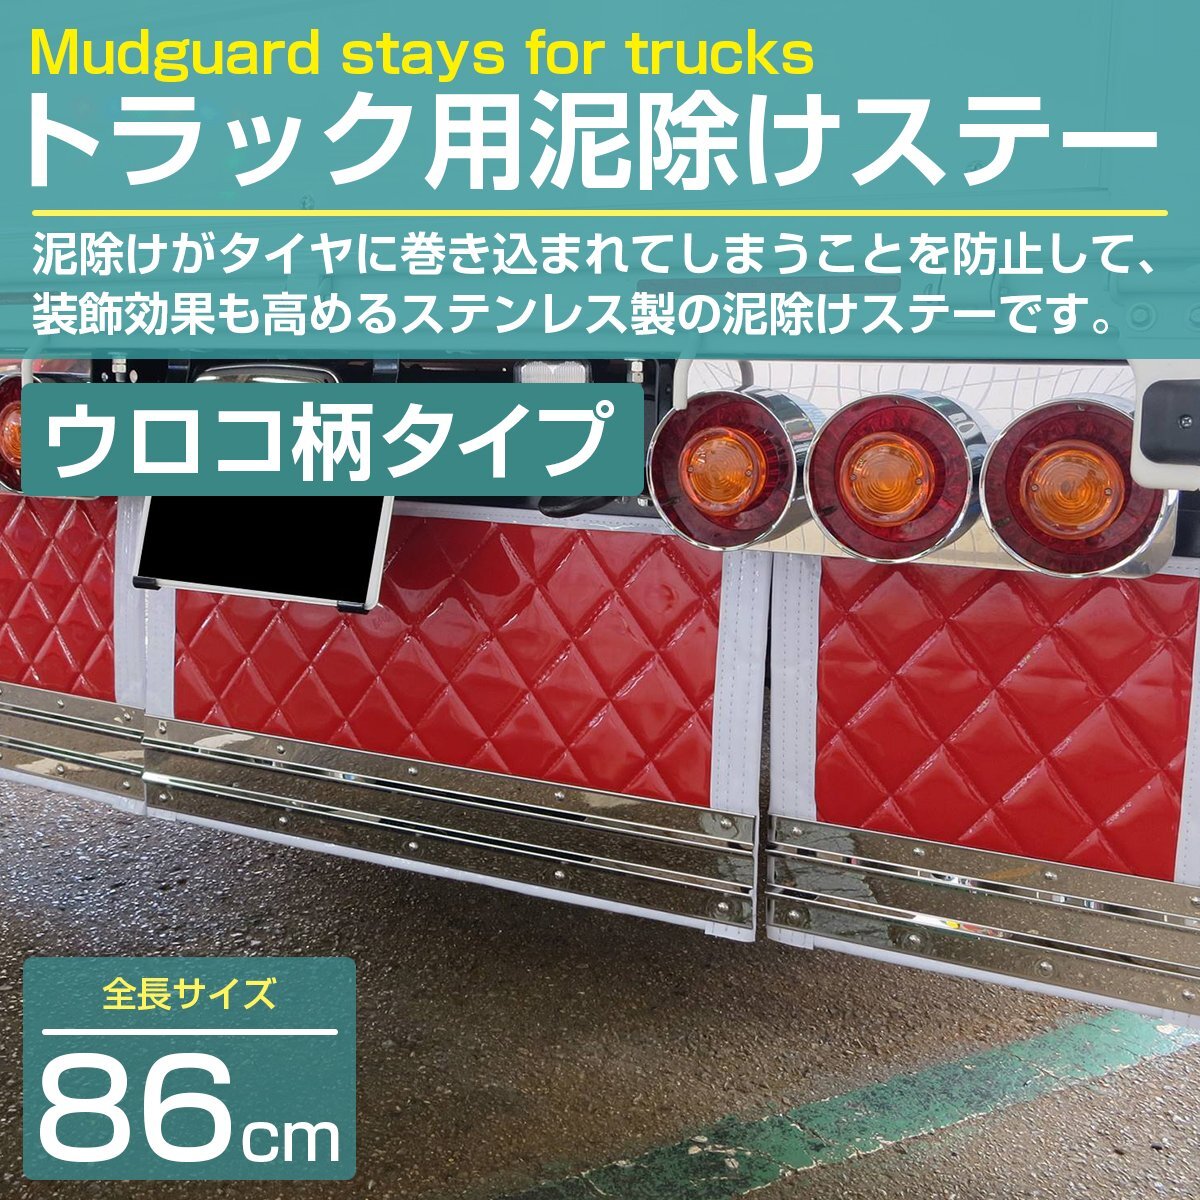  made of stainless steel SUS304 adoption mud guard stay 860mm 86cmu Logo pattern large truck mud guard mat mudguard stain installation fixation metal fittings 